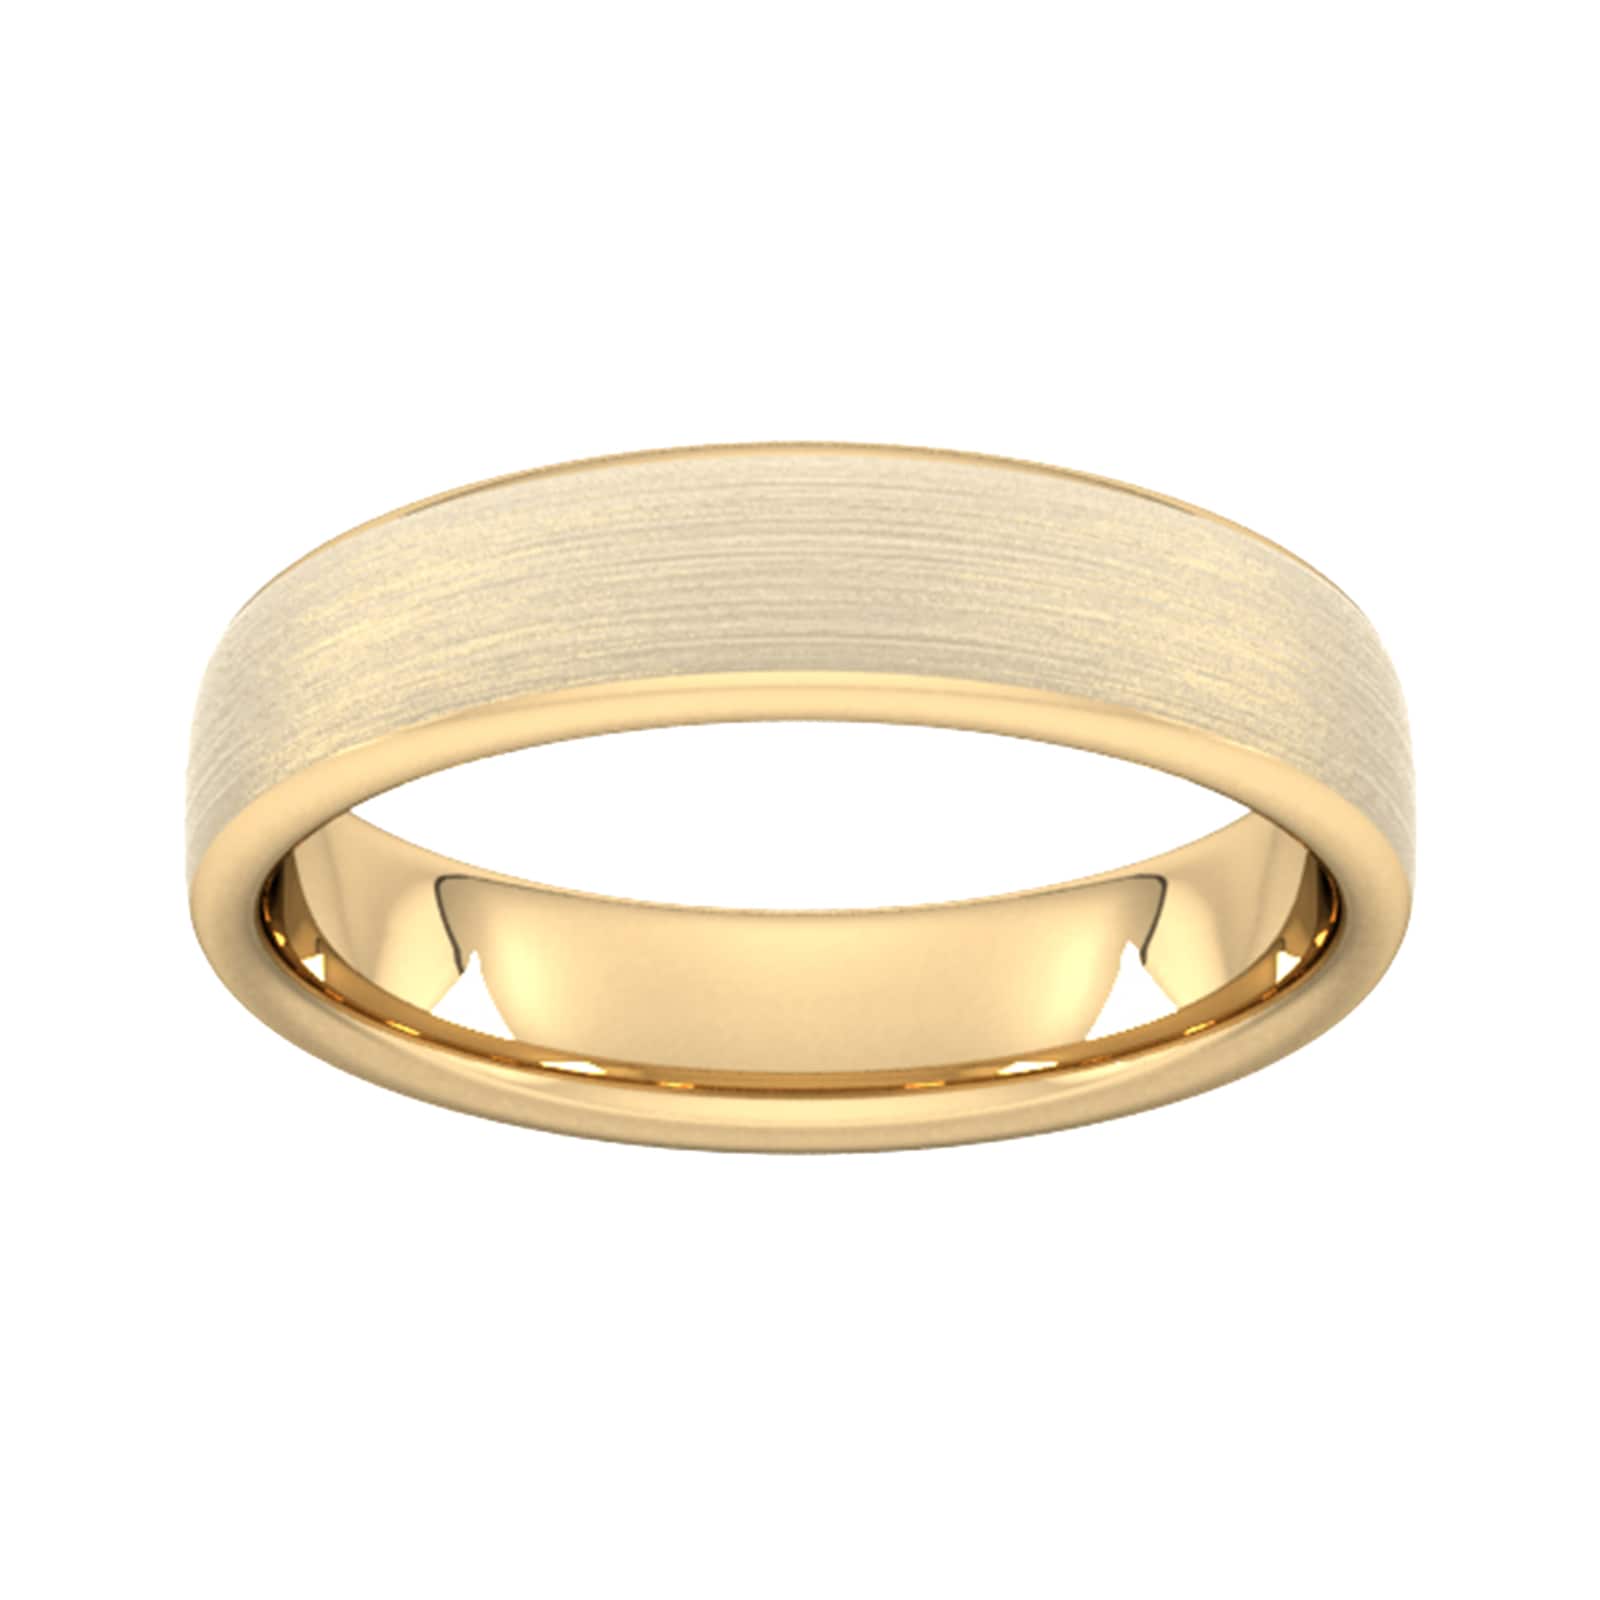 5mm D Shape Heavy Matt Finished Wedding Ring In 9 Carat Yellow Gold - Ring Size S